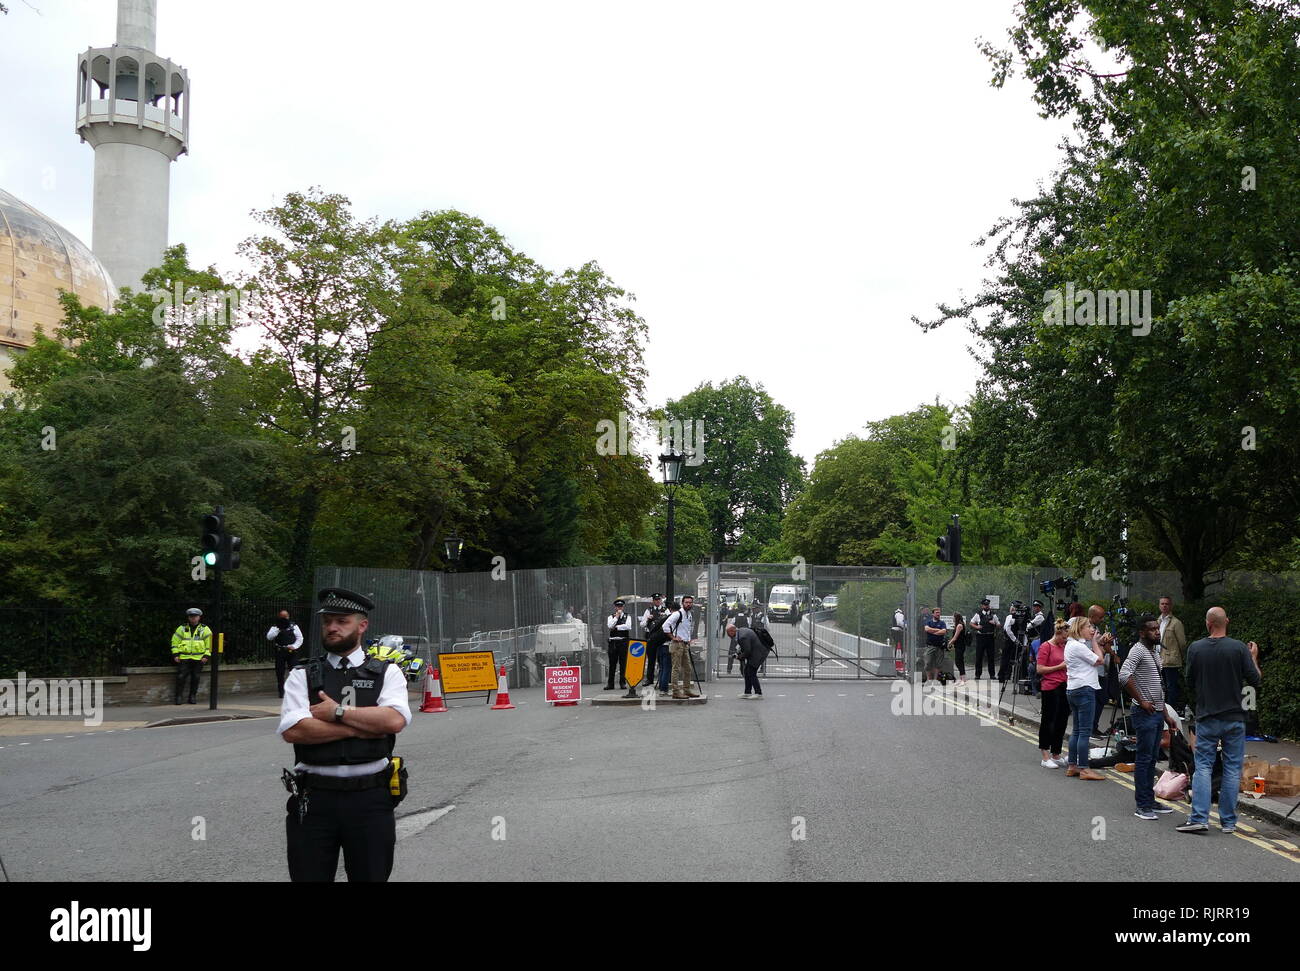 Security to Protect President Trump, around the American Ambassador's Residence in London, for the visit to the United Kingdom by President of the United States Donald Trump; July 2018. Stock Photo